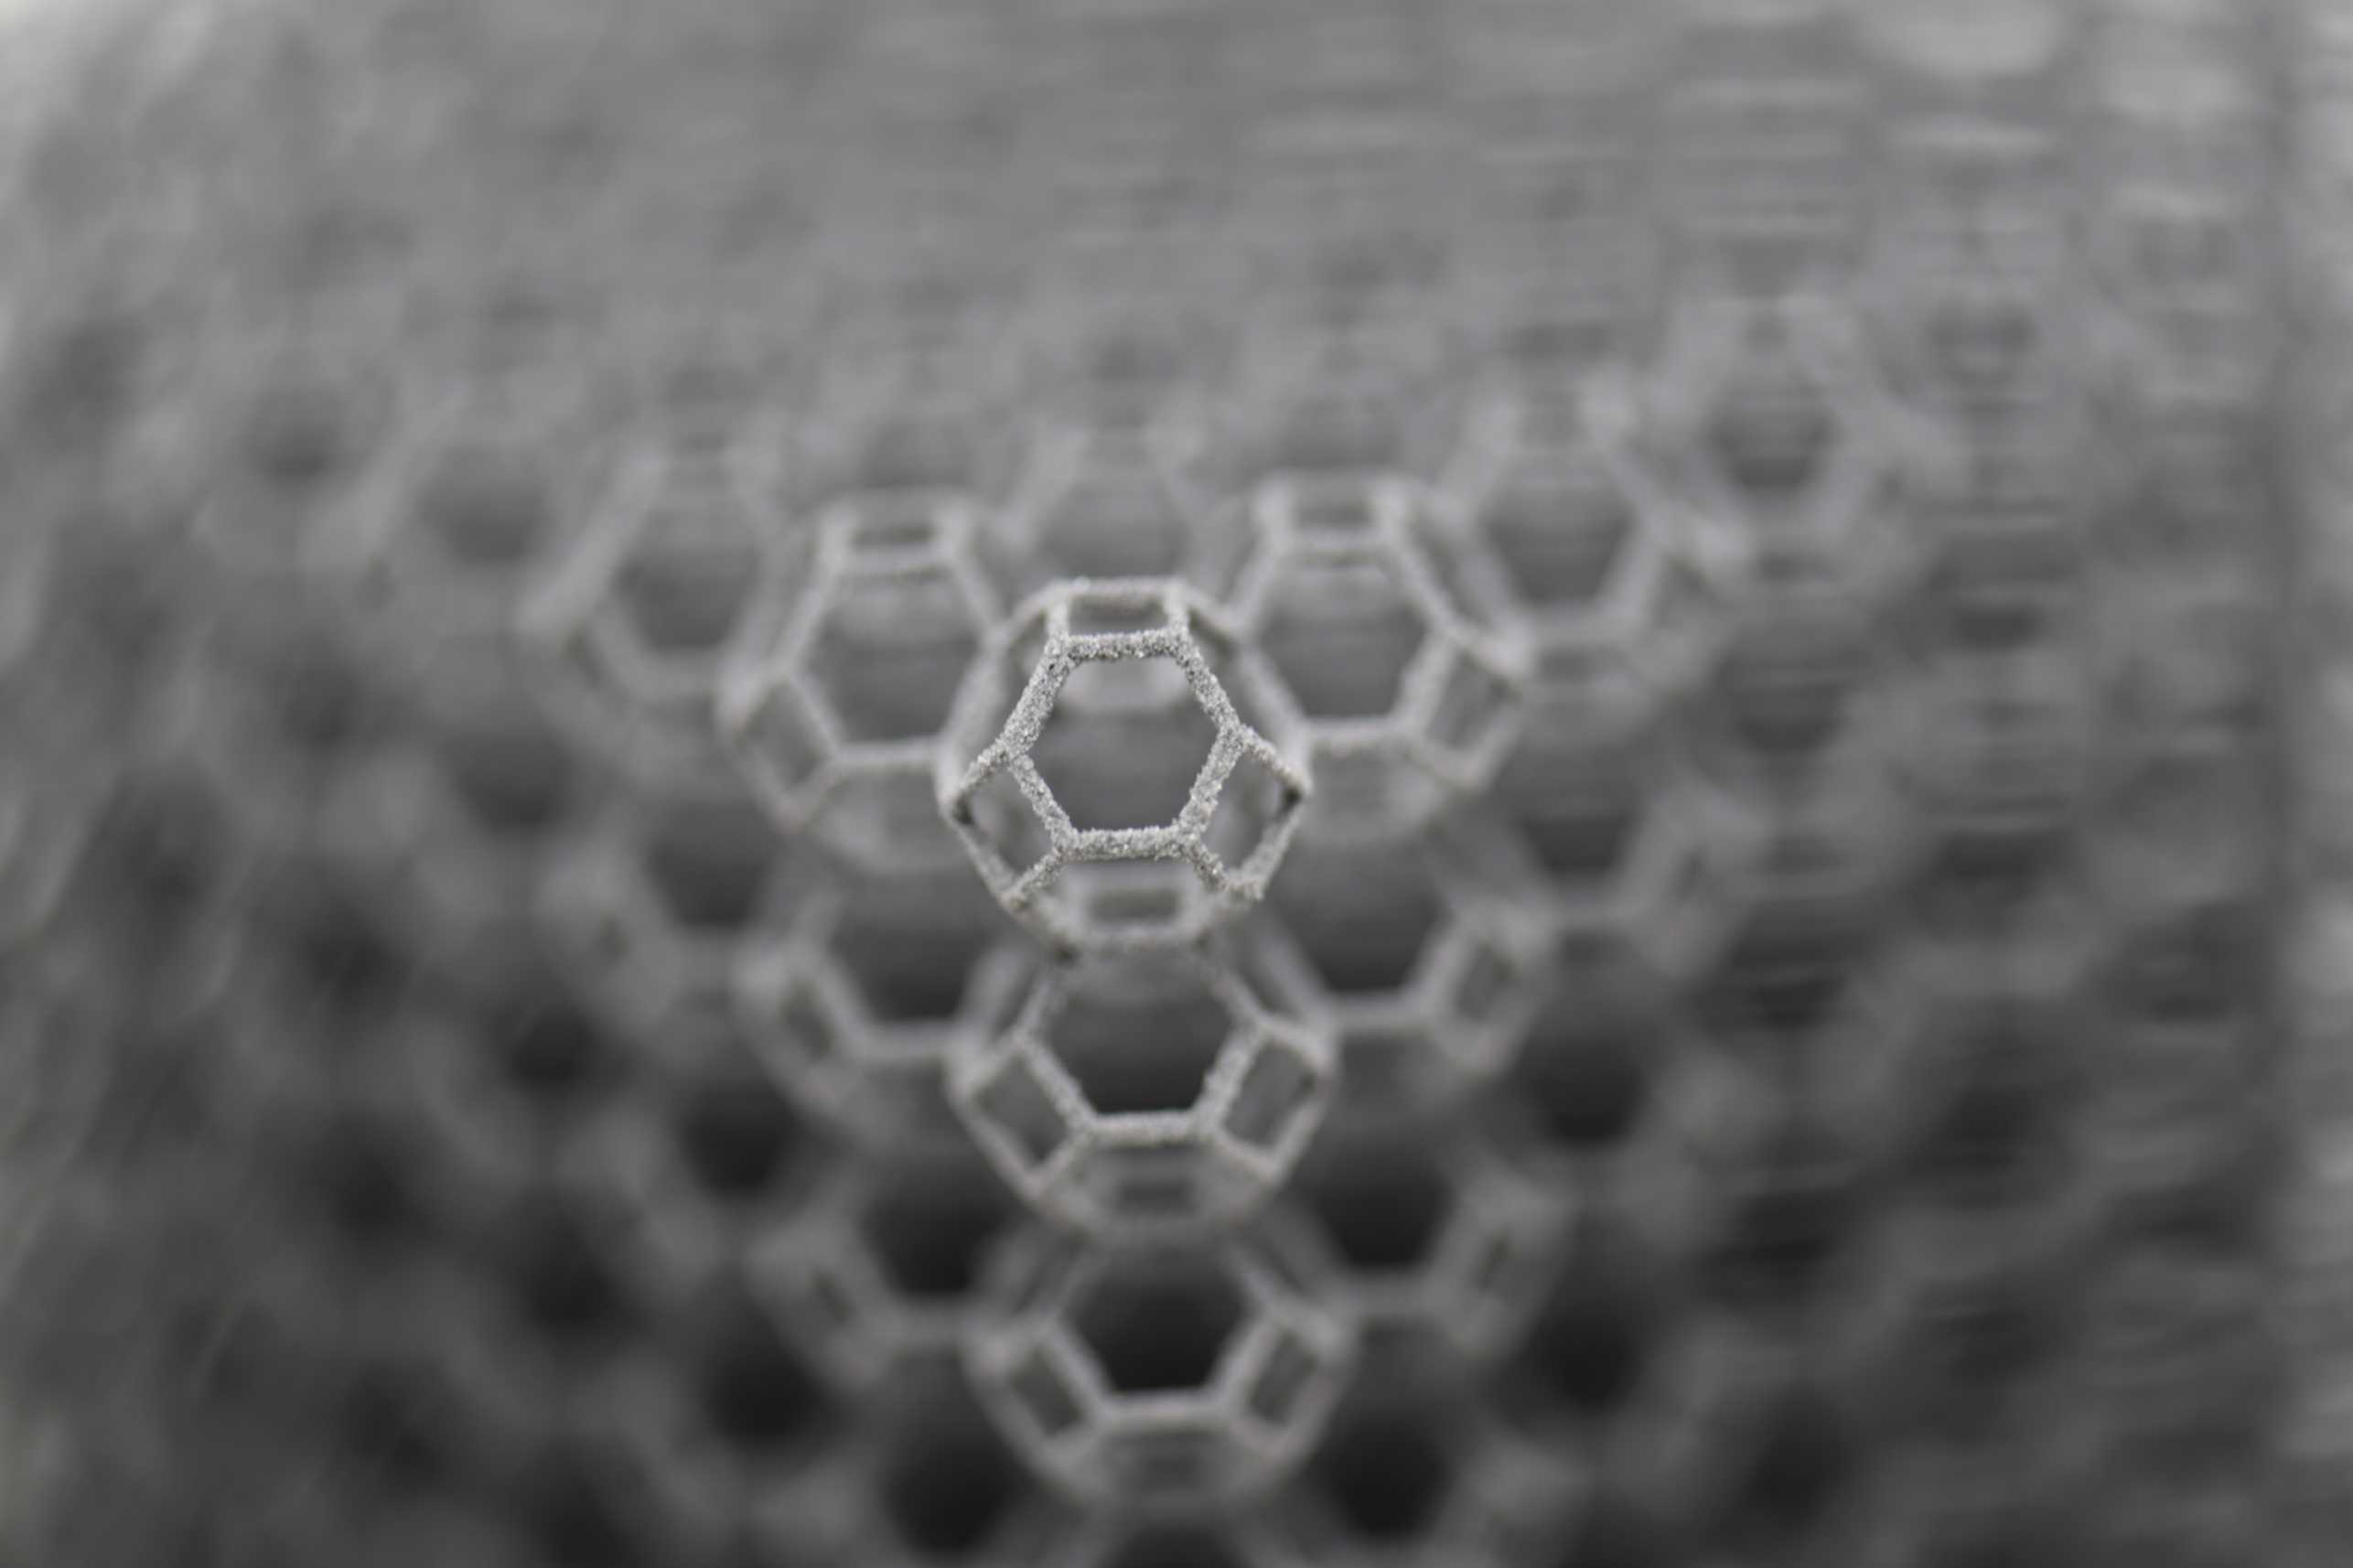 Enlarged view: 3D-printed polymer lattice